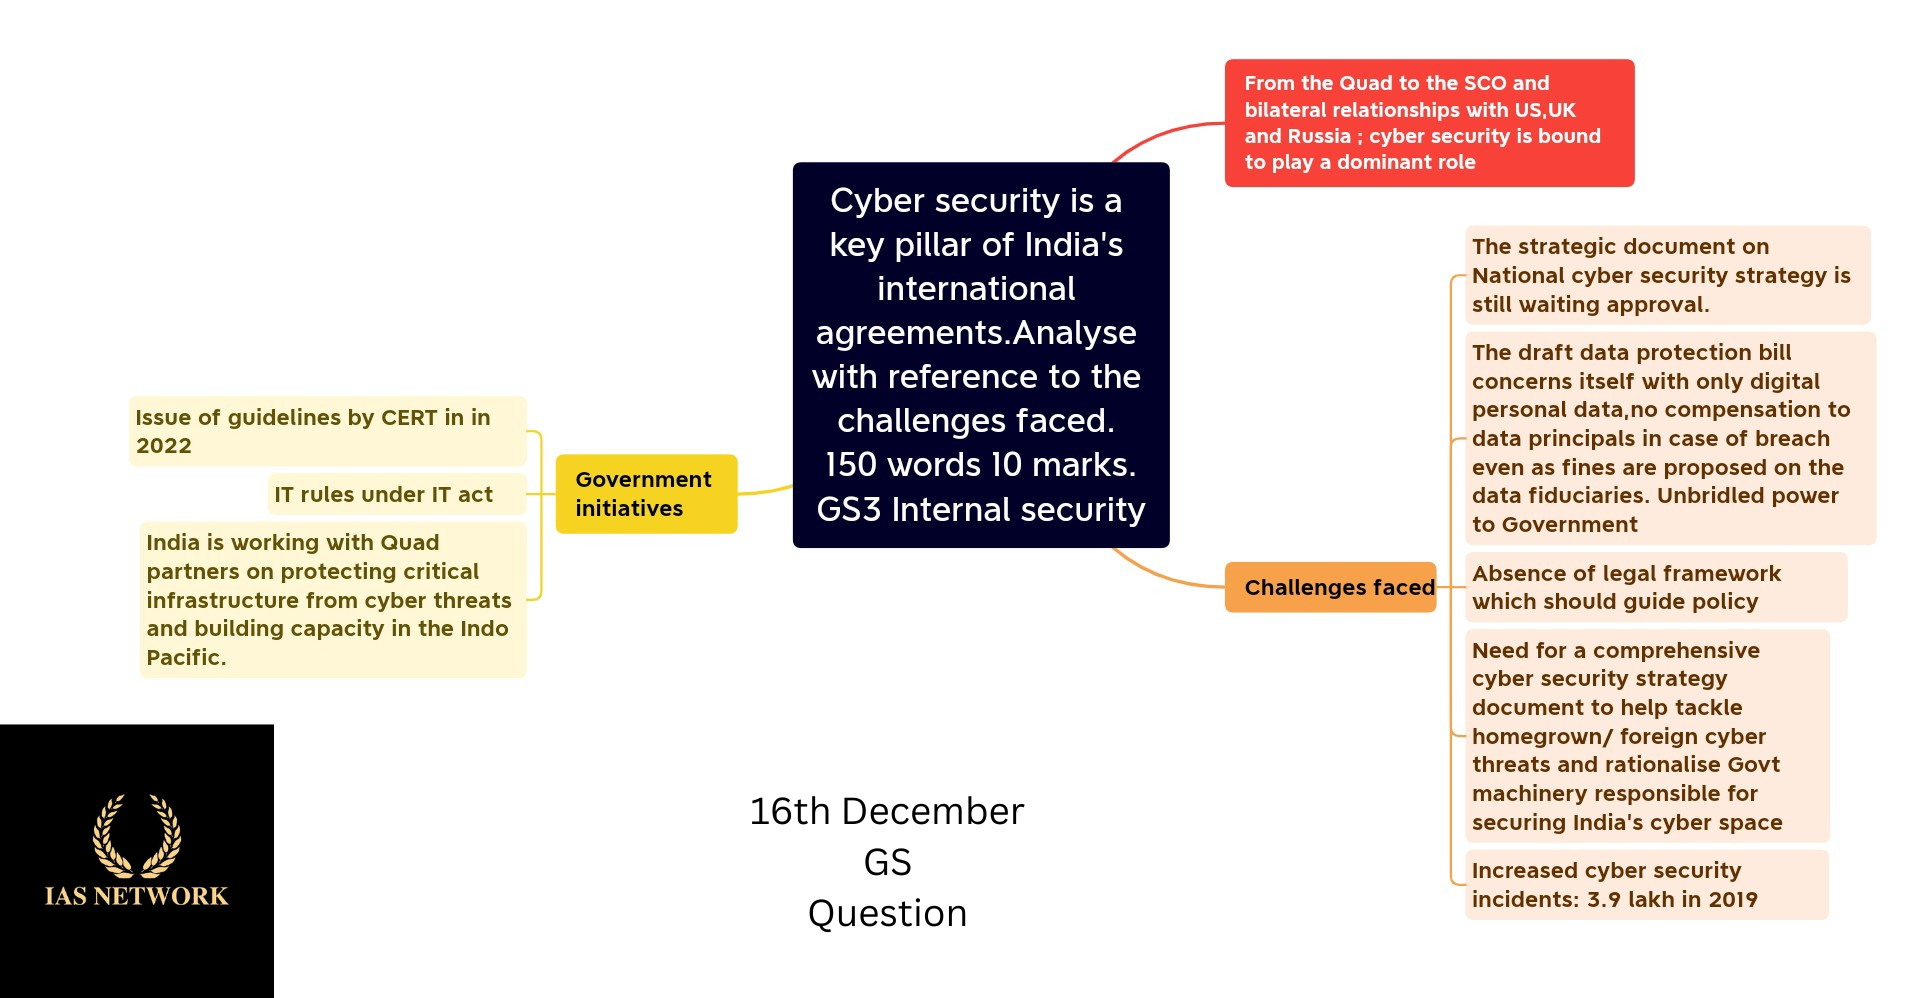 IAS NETWORK 16th DECEMBER GS QUESTION